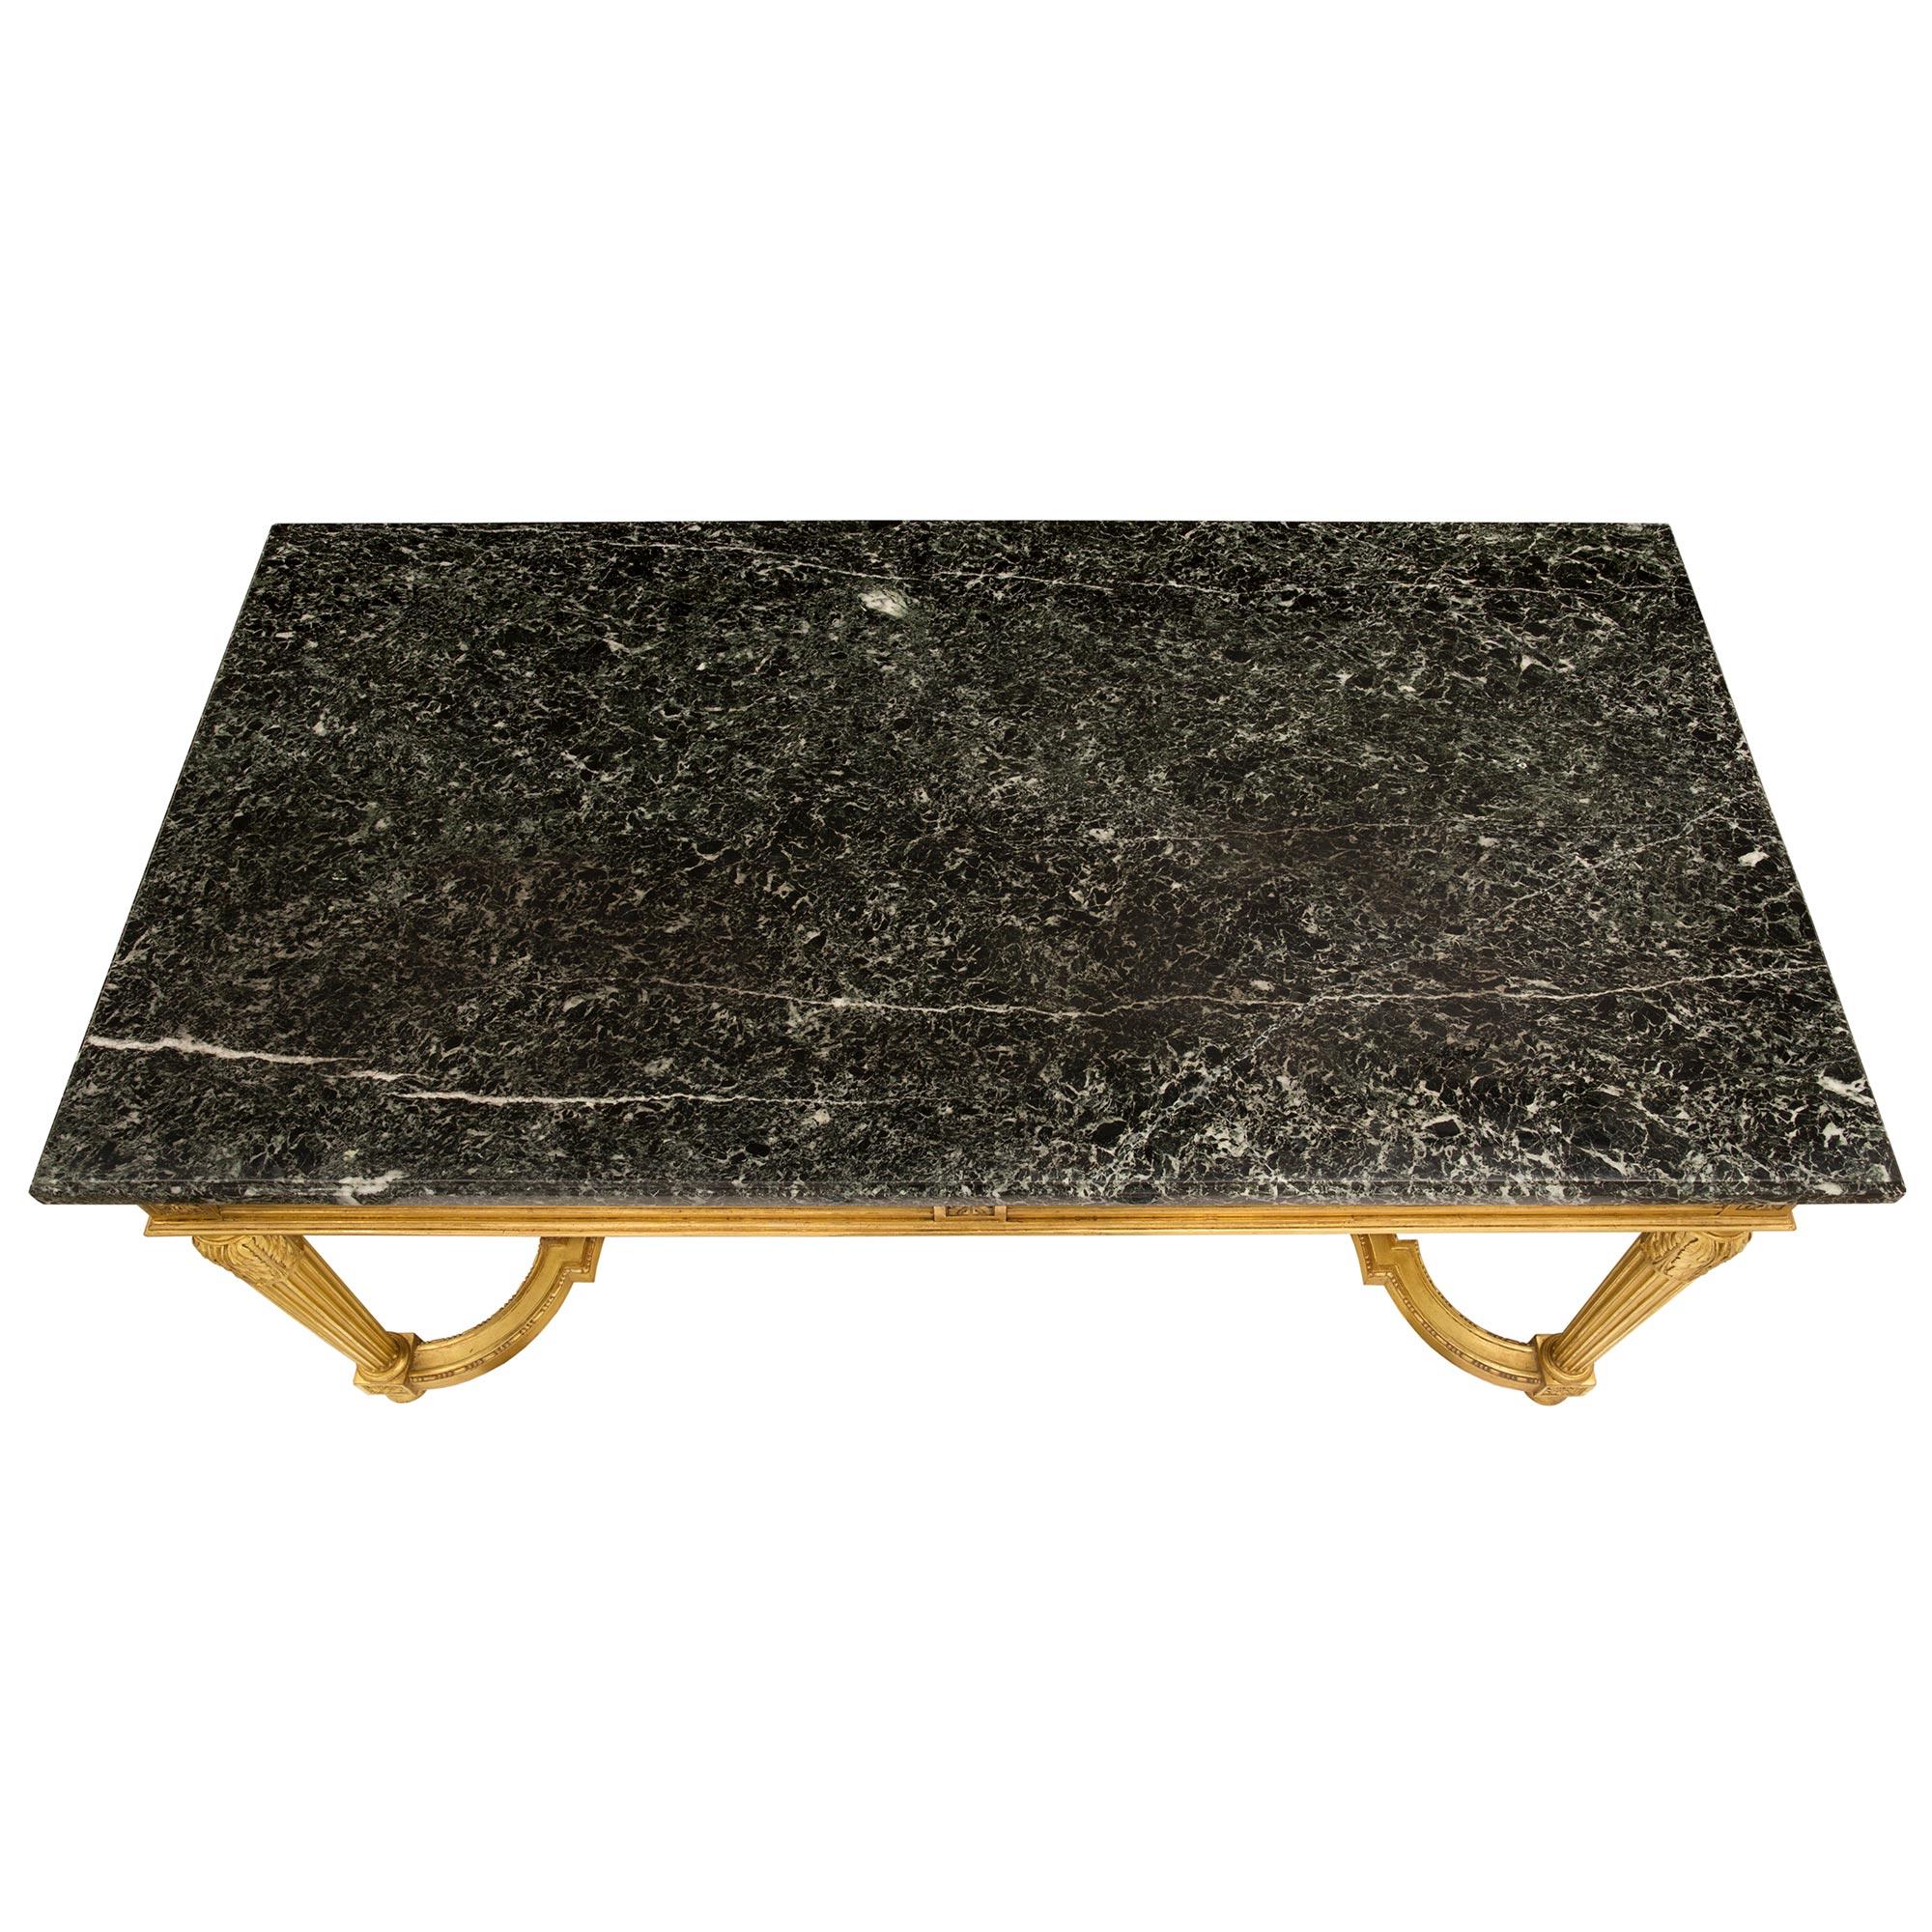 French 19th Century Louis XVI Style Giltwood and Vert Antique Marble Center Table For Sale